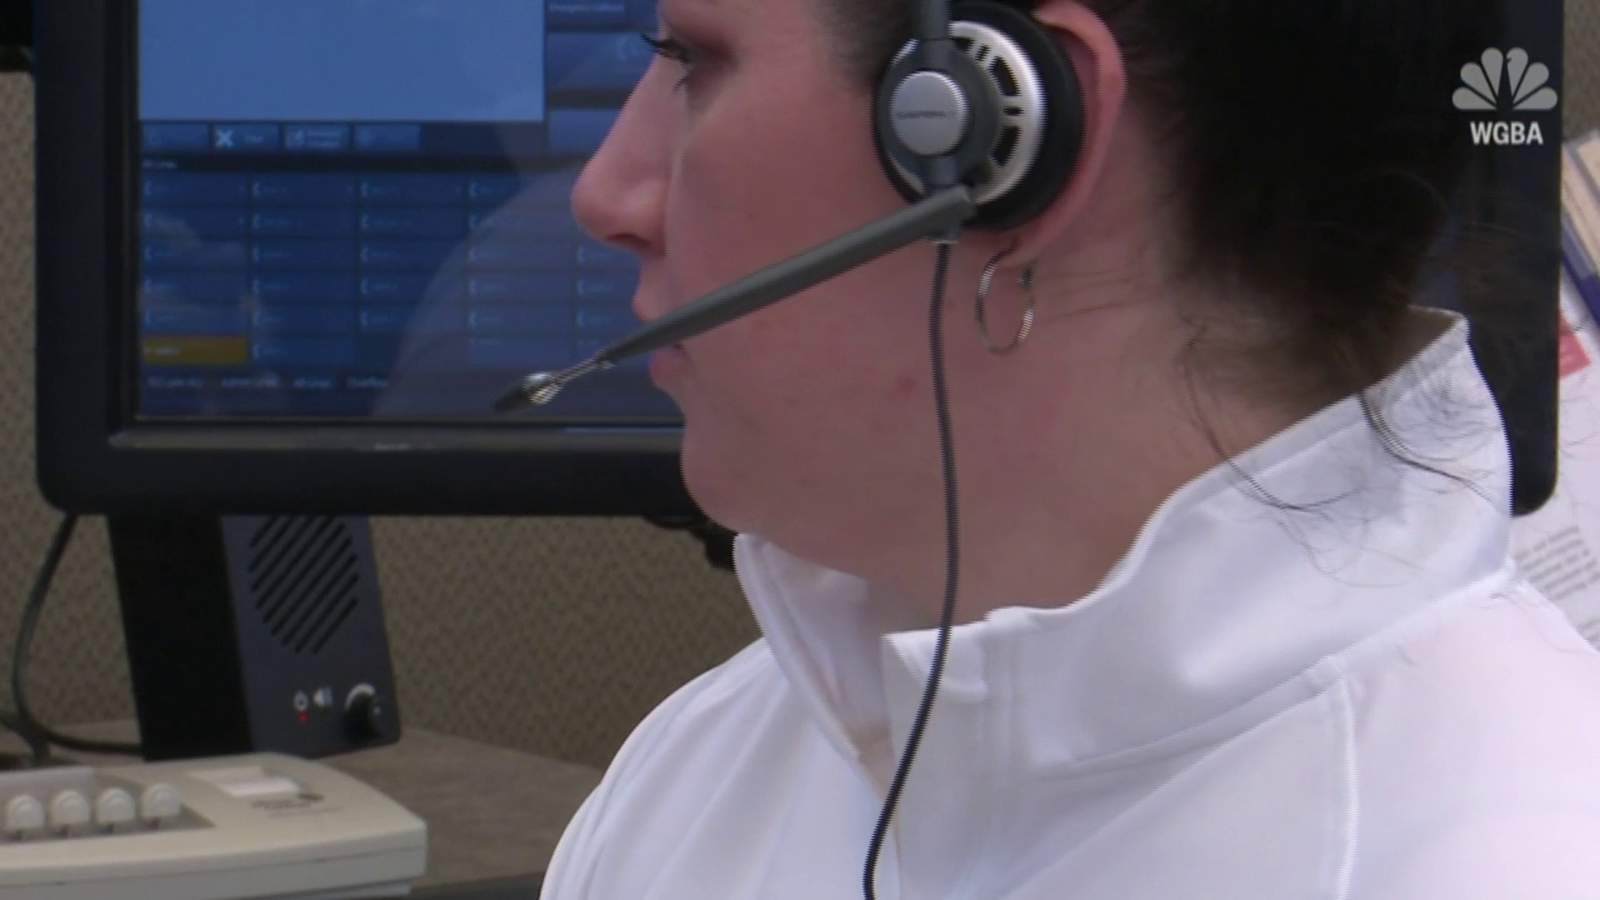 911 operator helps rescue human trafficking victim calling from Dominican Republic